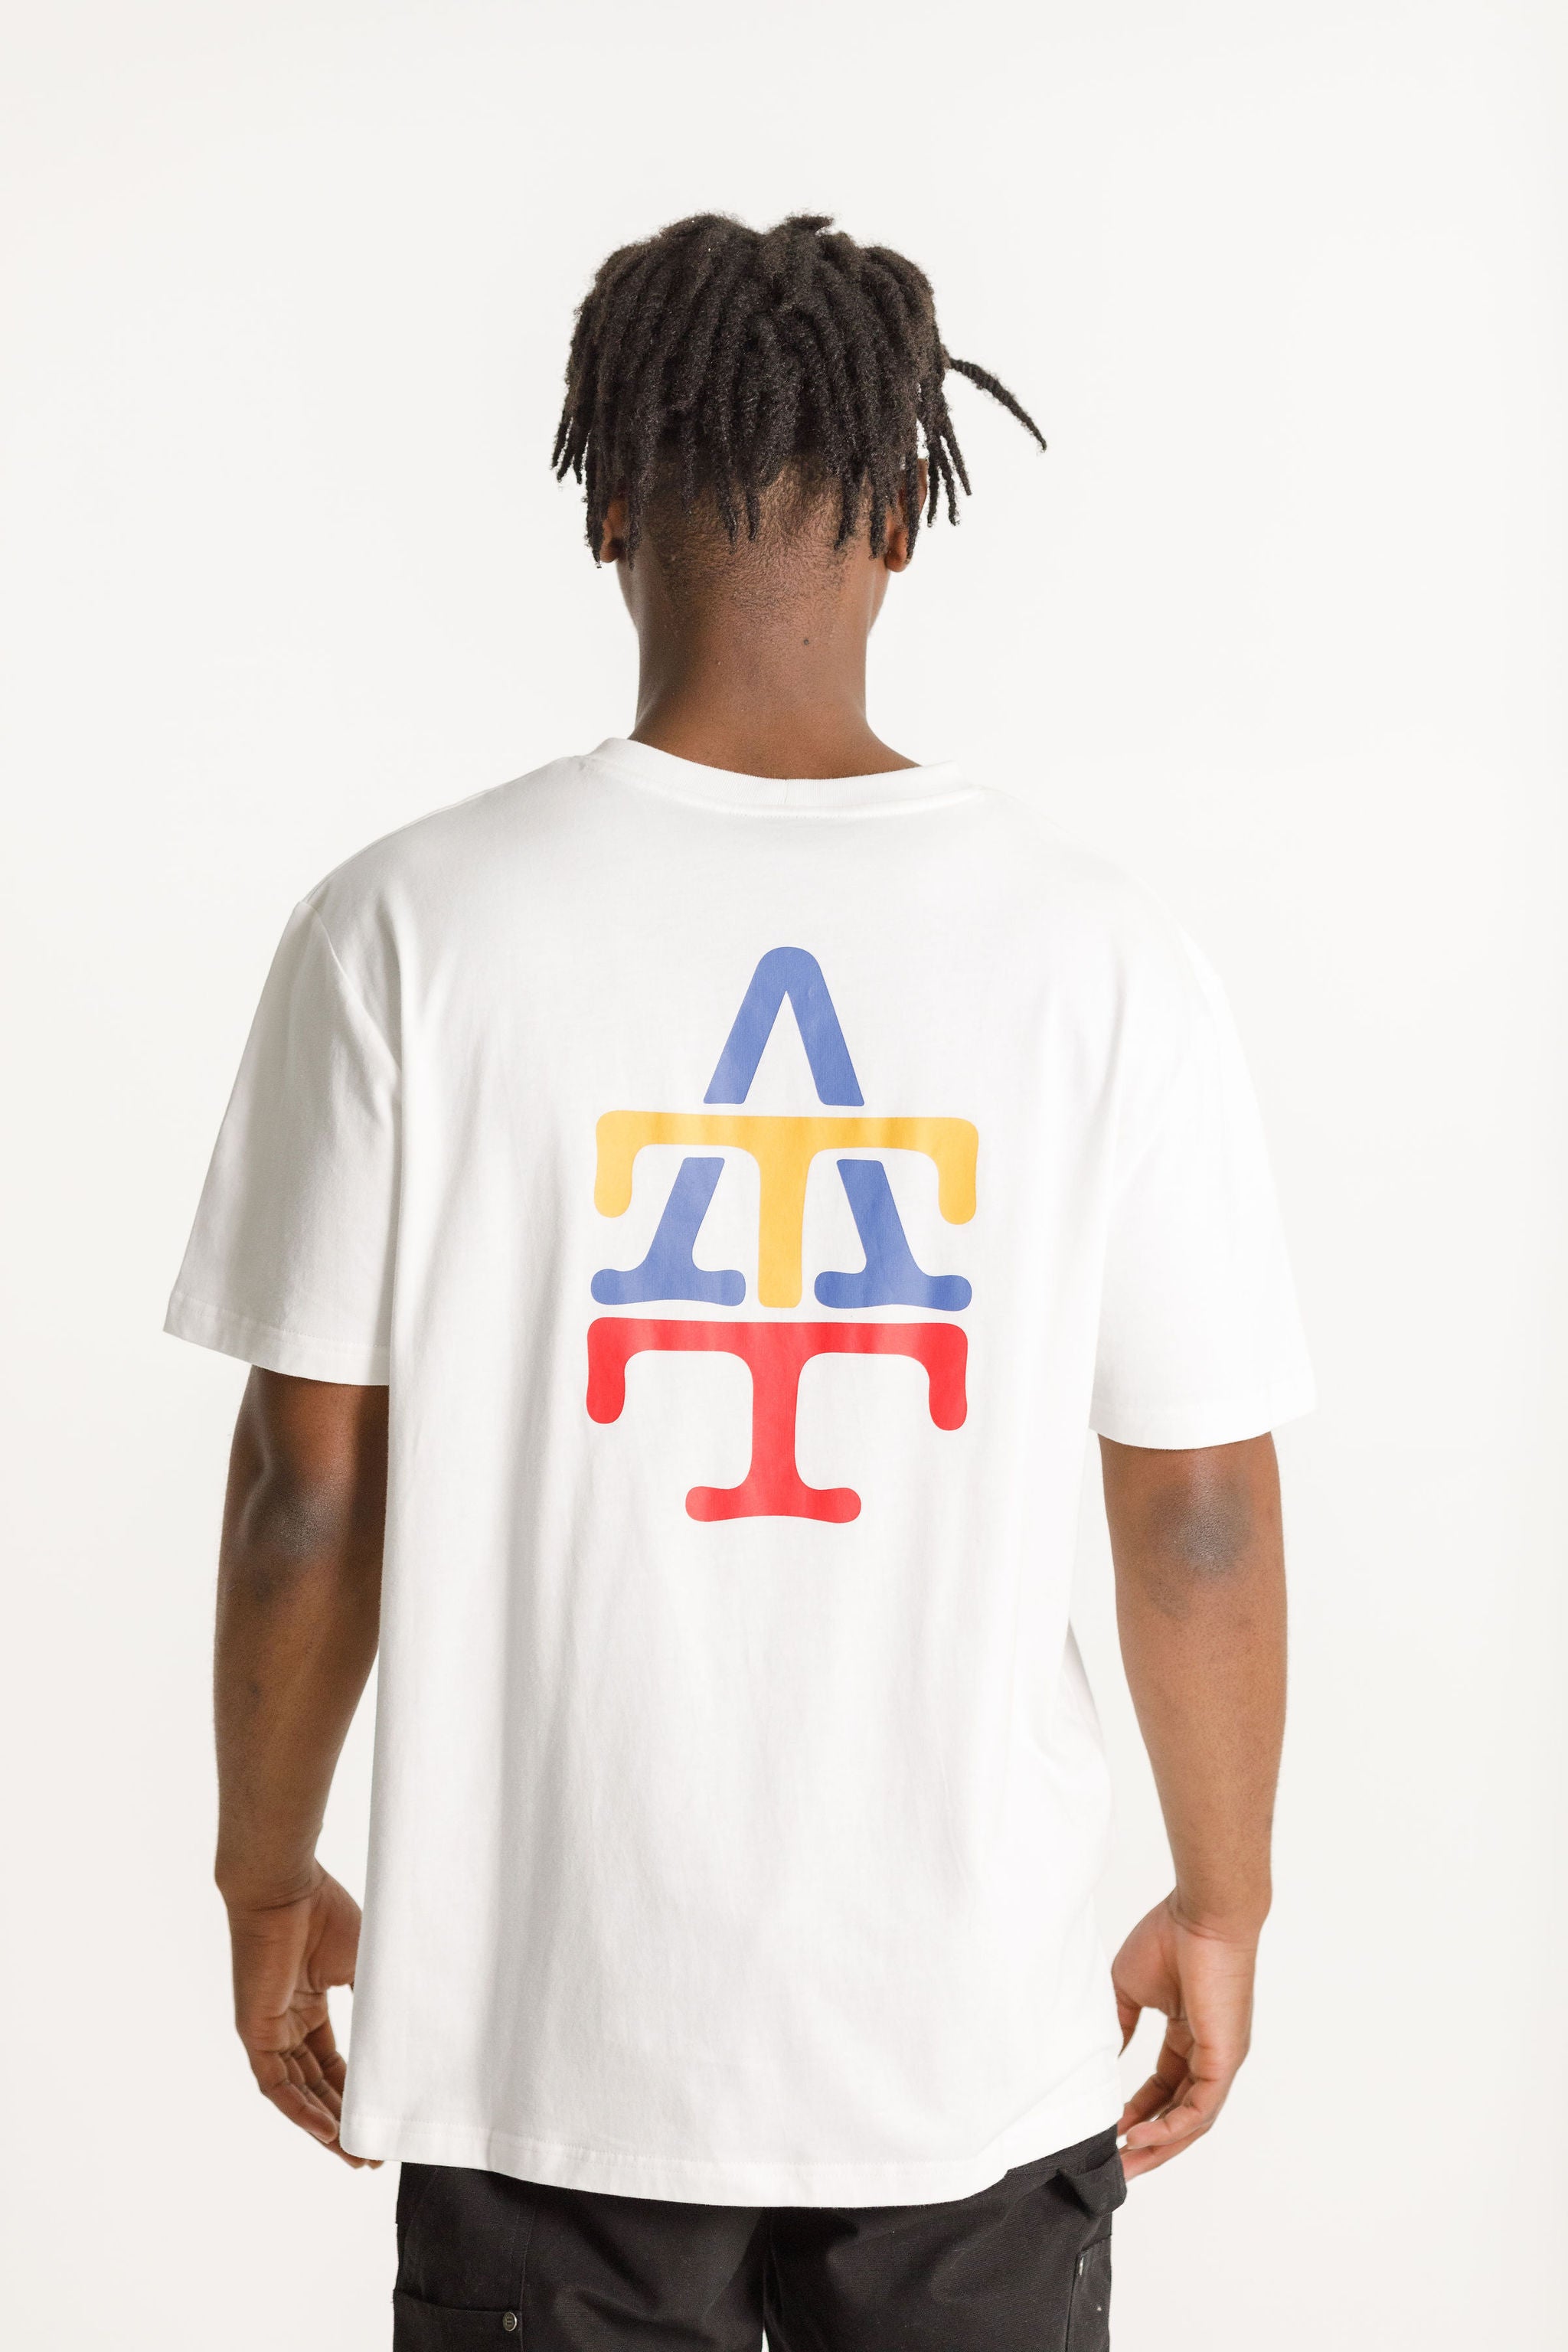 SS Tee - Sale - White with ATT College Print